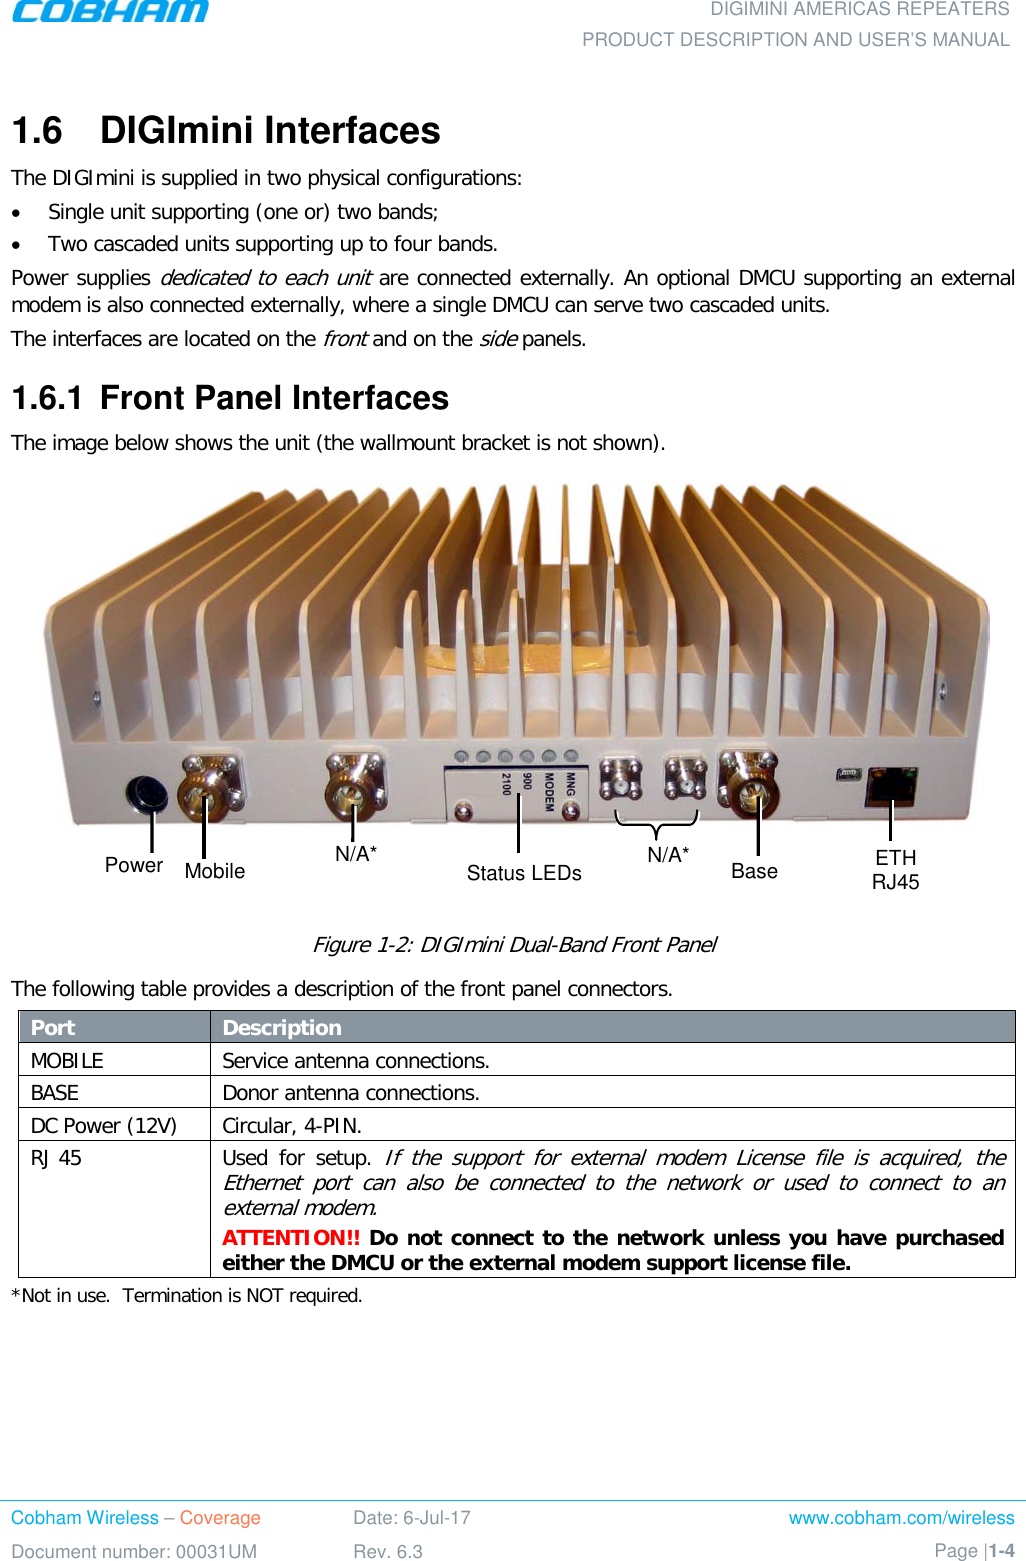  DIGIMINI AMERICAS REPEATERS PRODUCT DESCRIPTION AND USER’S MANUAL Cobham Wireless – Coverage Date: 6-Jul-17 www.cobham.com/wireless Document number: 00031UM Rev. 6.3 Page |1-4  1.6  DIGImini Interfaces The DIGImini is supplied in two physical configurations:  • Single unit supporting (one or) two bands;  • Two cascaded units supporting up to four bands.  Power supplies dedicated to each unit are connected externally. An optional DMCU supporting an external modem is also connected externally, where a single DMCU can serve two cascaded units.  The interfaces are located on the front and on the side panels. 1.6.1  Front Panel Interfaces The image below shows the unit (the wallmount bracket is not shown).     Figure  1-2: DIGImini Dual-Band Front Panel  The following table provides a description of the front panel connectors. Port Description  MOBILE Service antenna connections.  BASE  Donor antenna connections.  DC Power (12V) Circular, 4-PIN.  RJ 45  Used for setup. If the support for external modem License file is acquired, the Ethernet port can also be connected to the network or used to connect to an external modem. ATTENTION!! Do not connect to the network unless you have purchased either the DMCU or the external modem support license file. *Not in use.  Termination is NOT required. Status LEDs N/A* Power Mobile N/A* Base ETH RJ45 